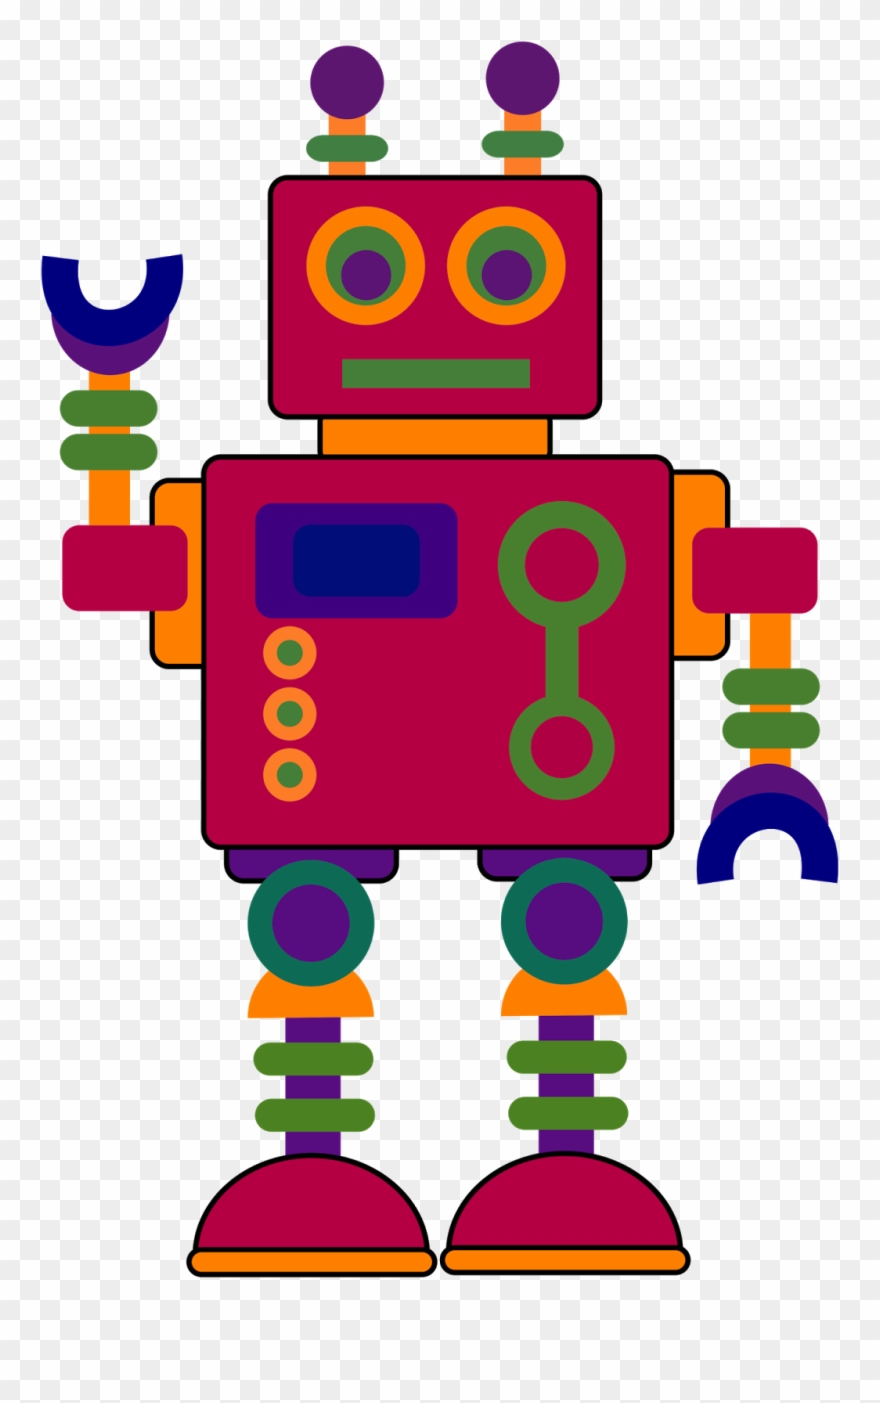 Robot clipart library.